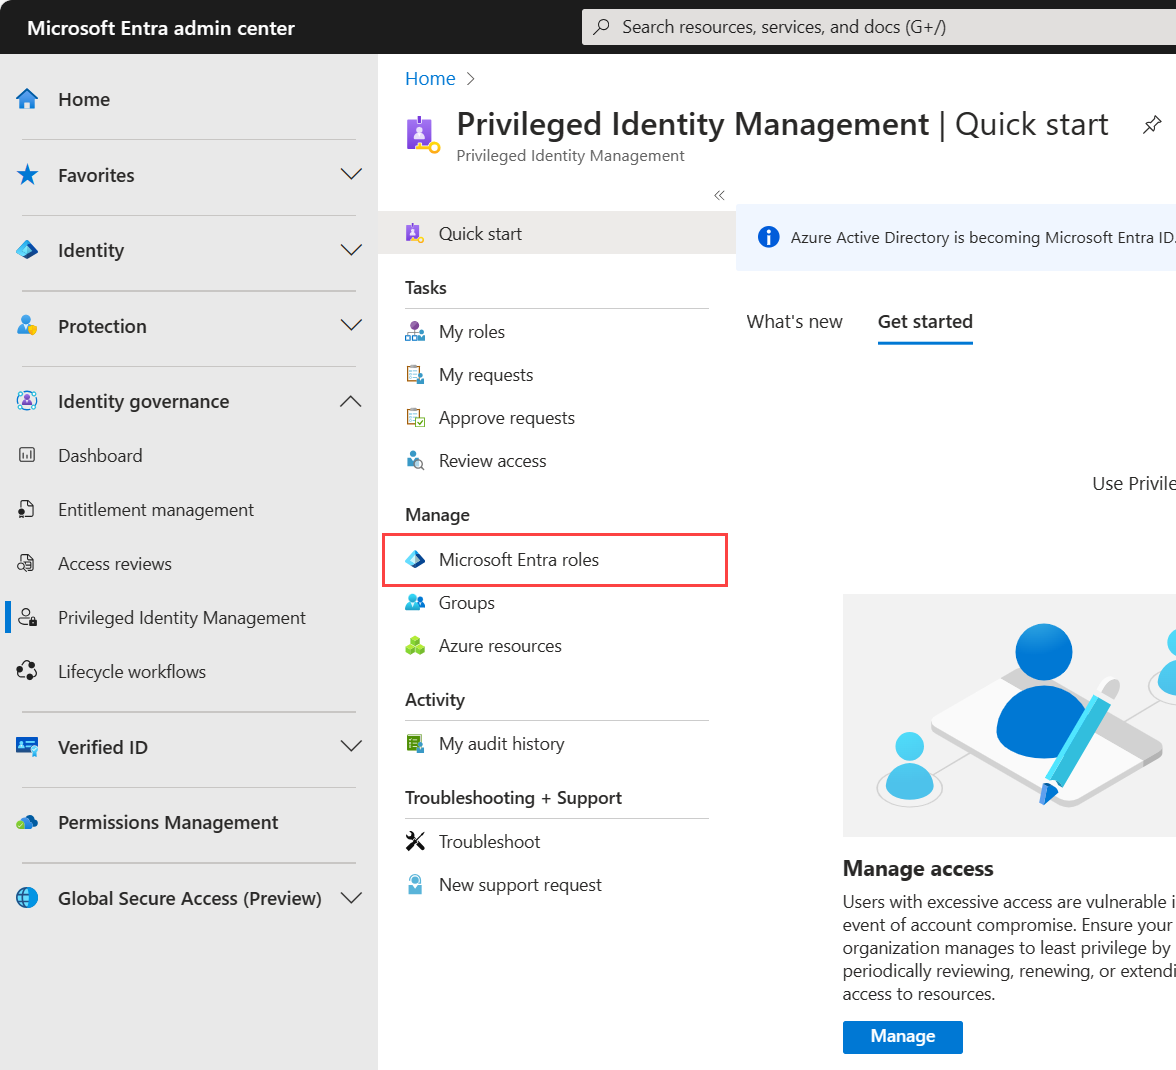 Select Identity Governance in the Microsoft Entra admin center screenshot.